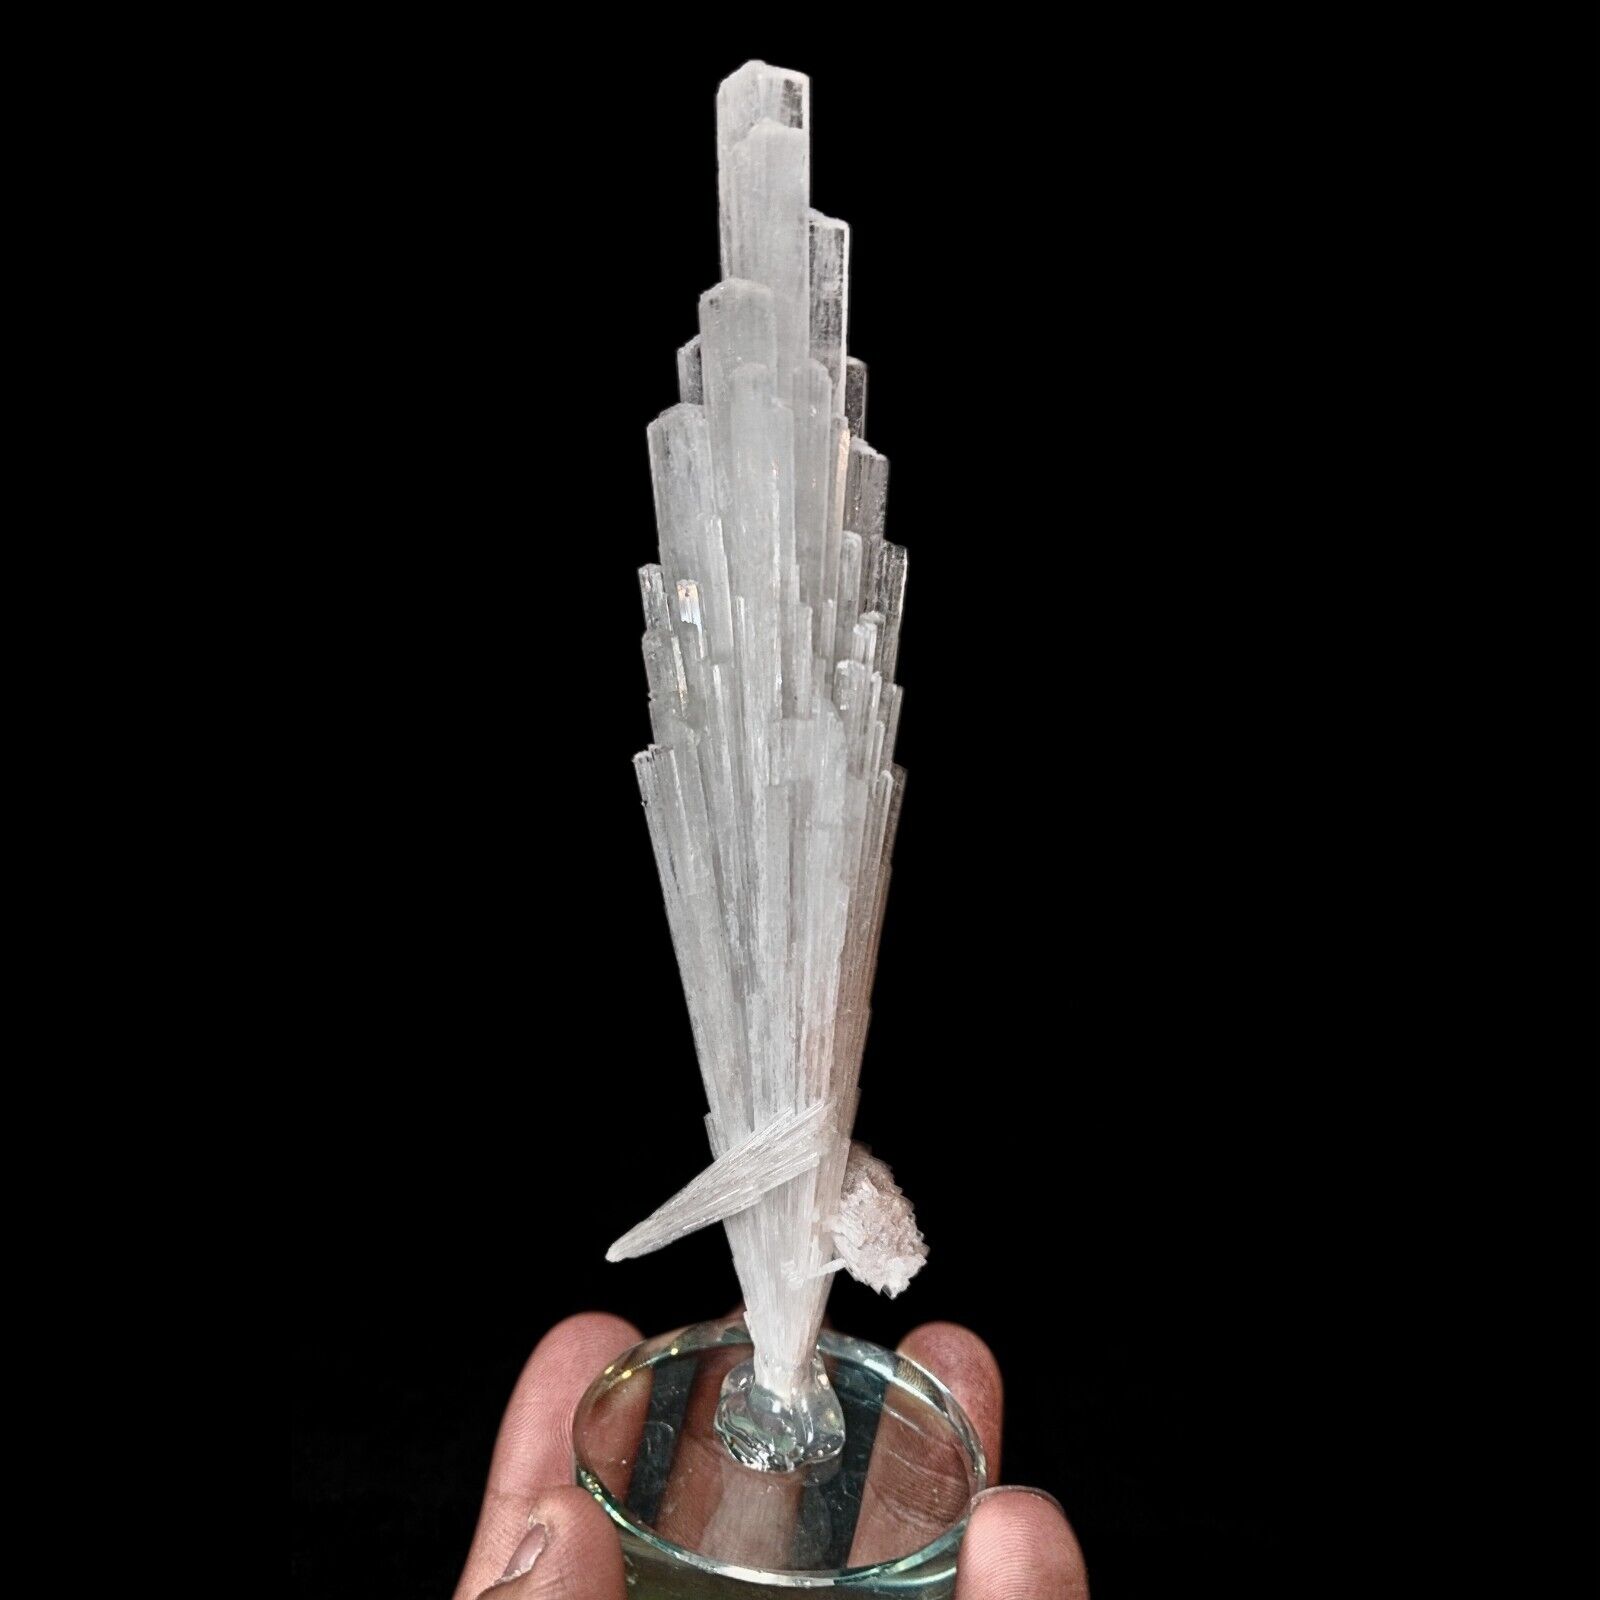 50g Scolecite Healing Crystal Embrace Nature's Blessing 6x4x3cm Gemstone Treasur